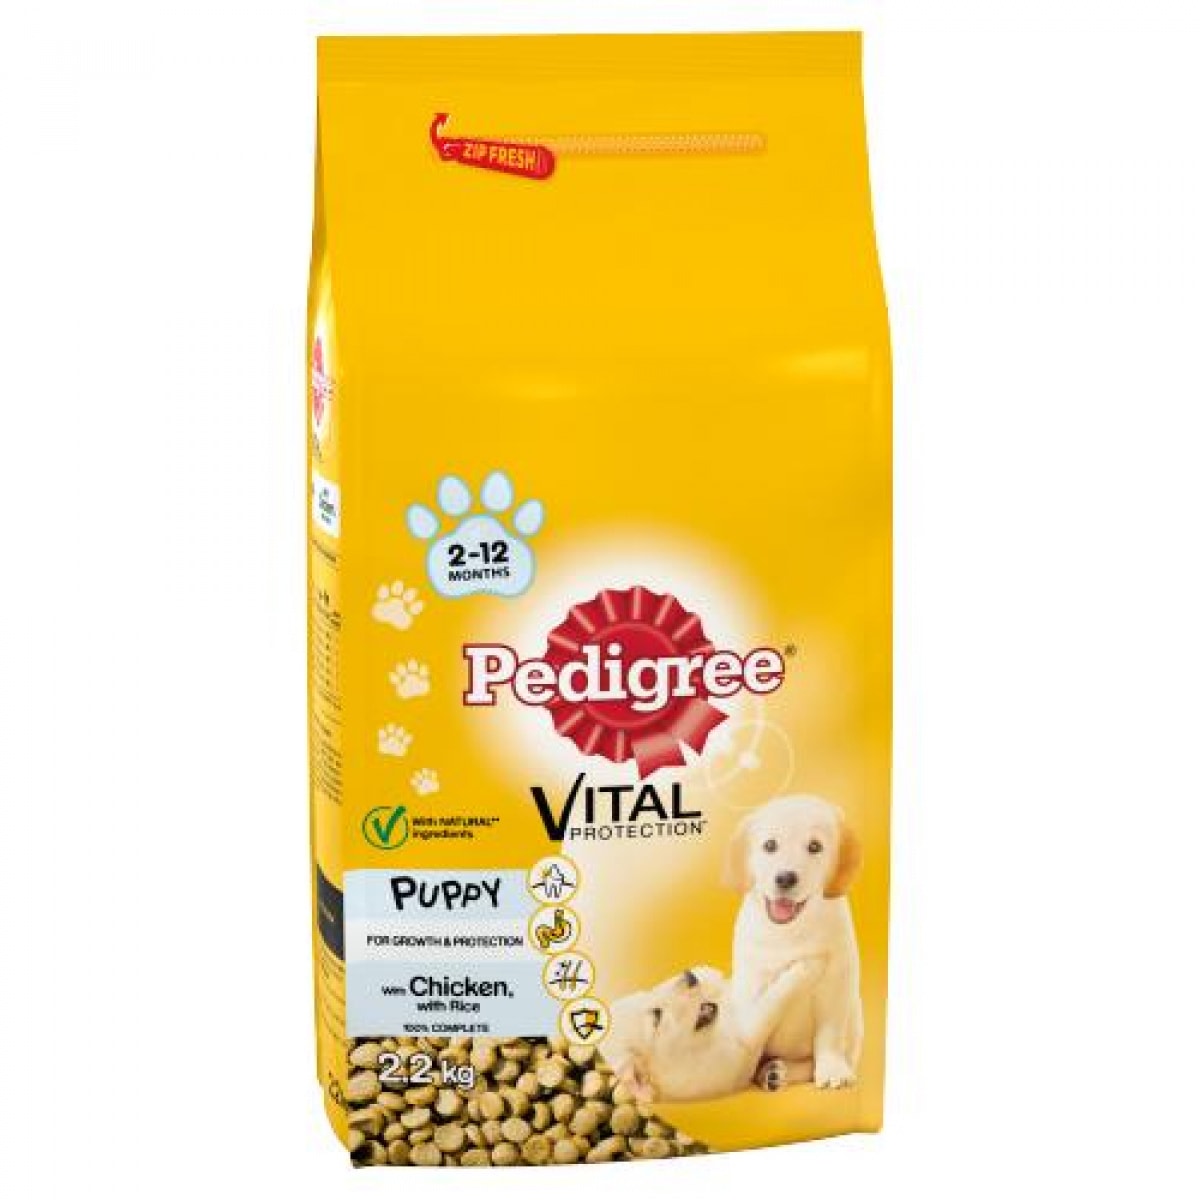 Pedigree Puppy 2.2kg – Pawfect Supplies Ltd Product Image